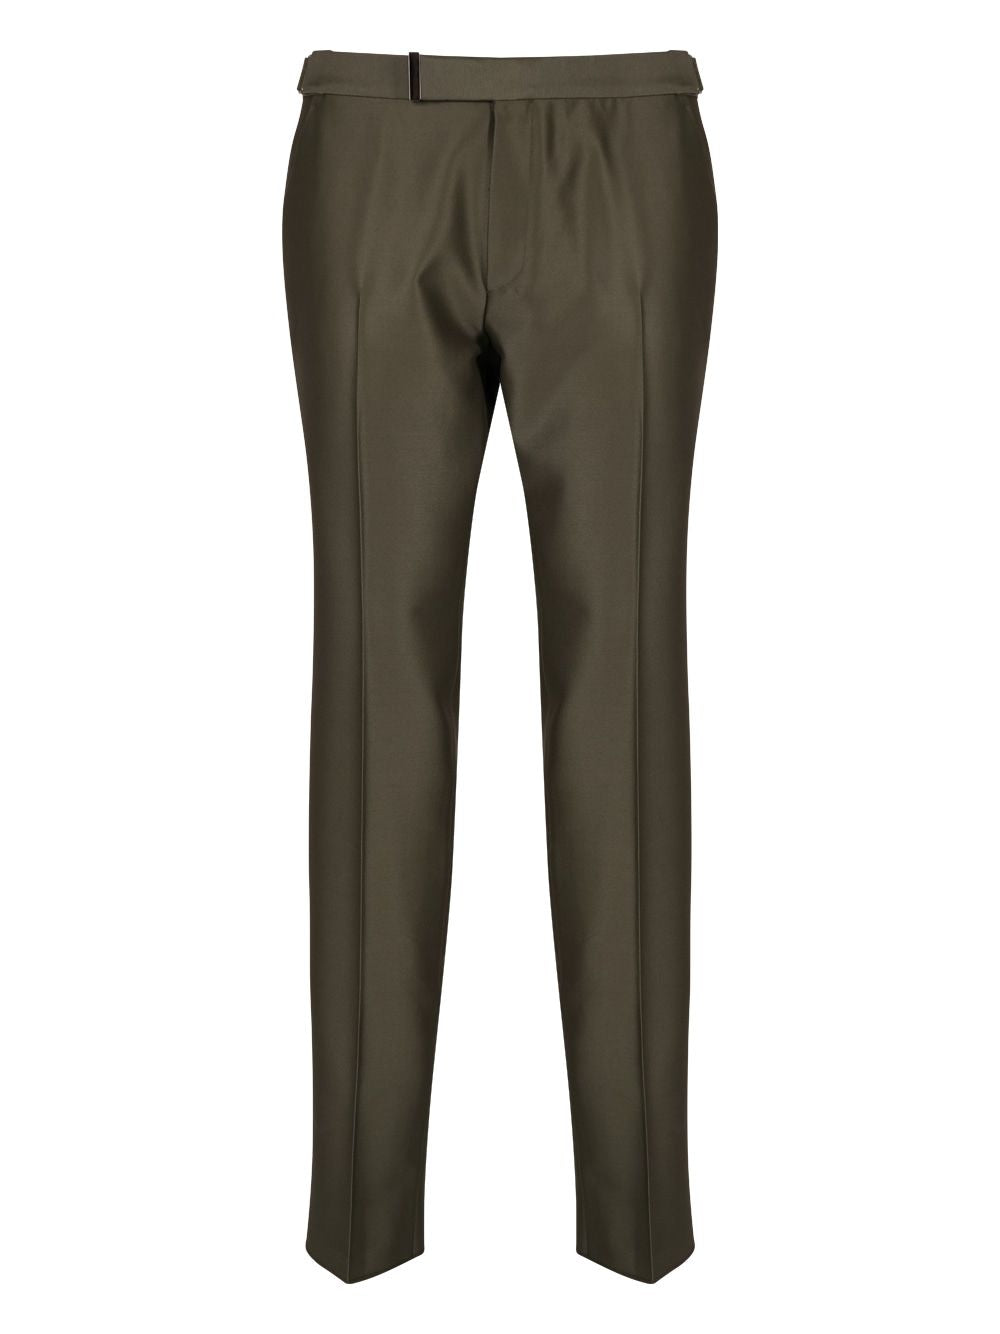 TOM FORD Green Pressed Crease Trousers for Men